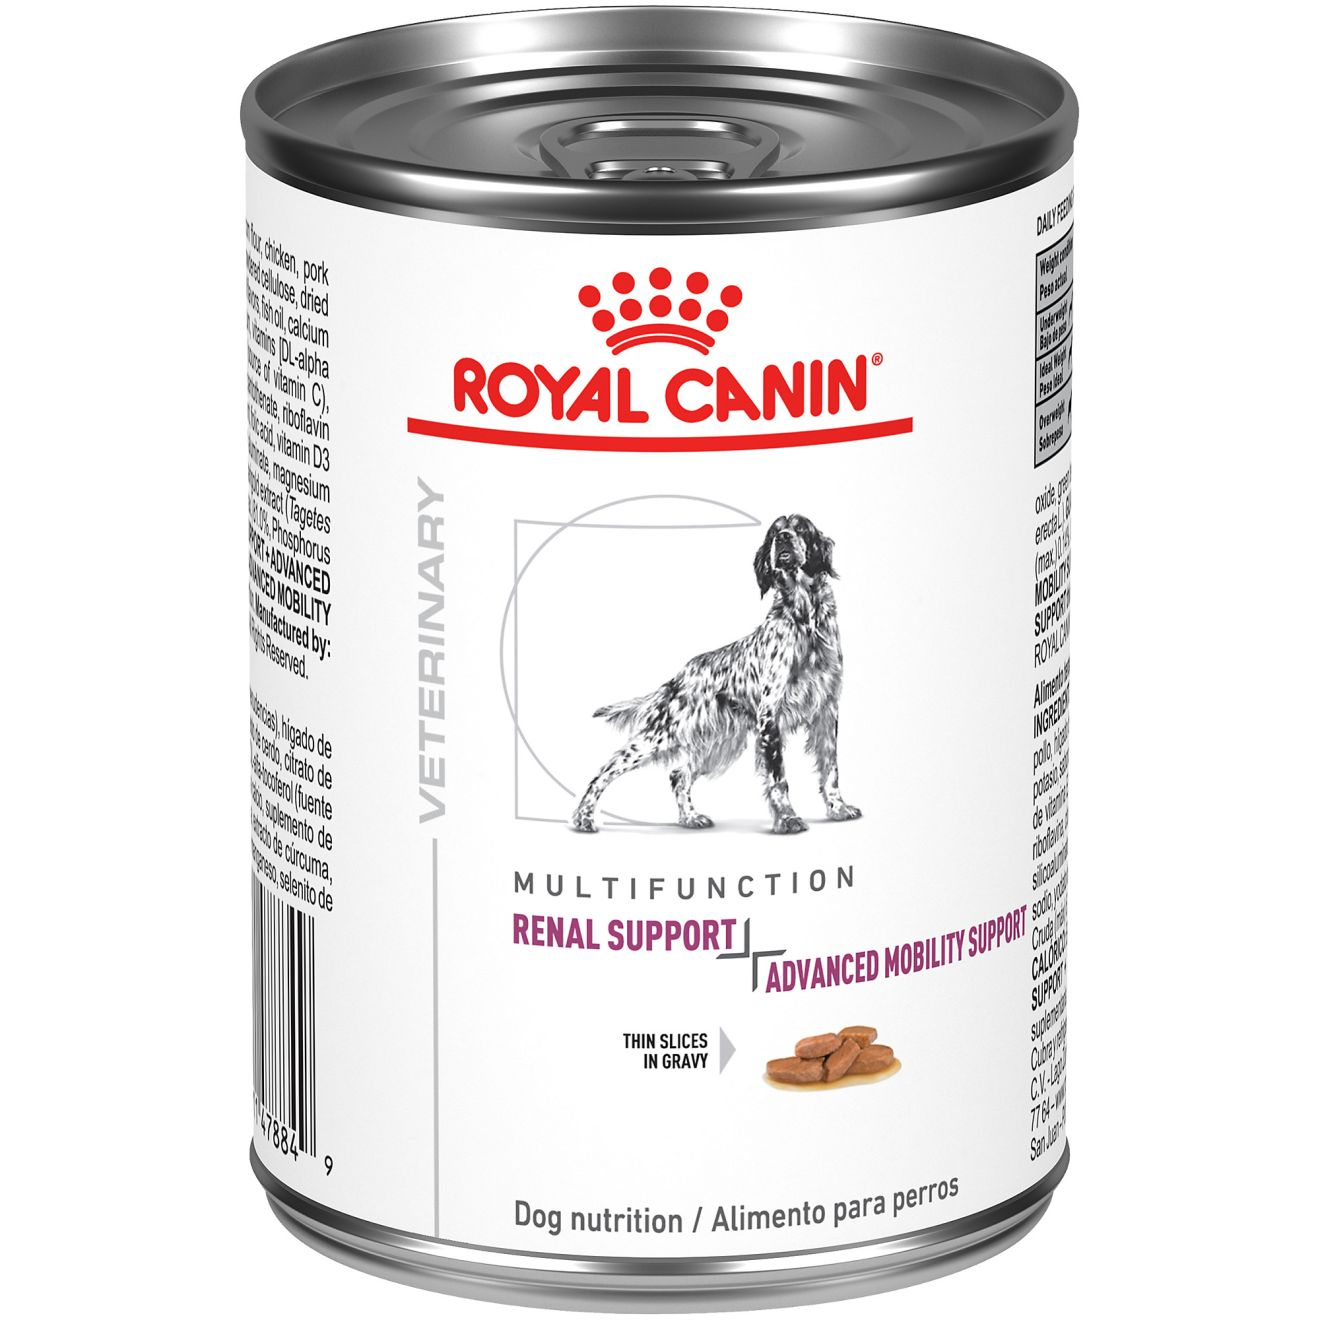 Canine Renal Support + Advanced Mobility Support thin slices in gravy